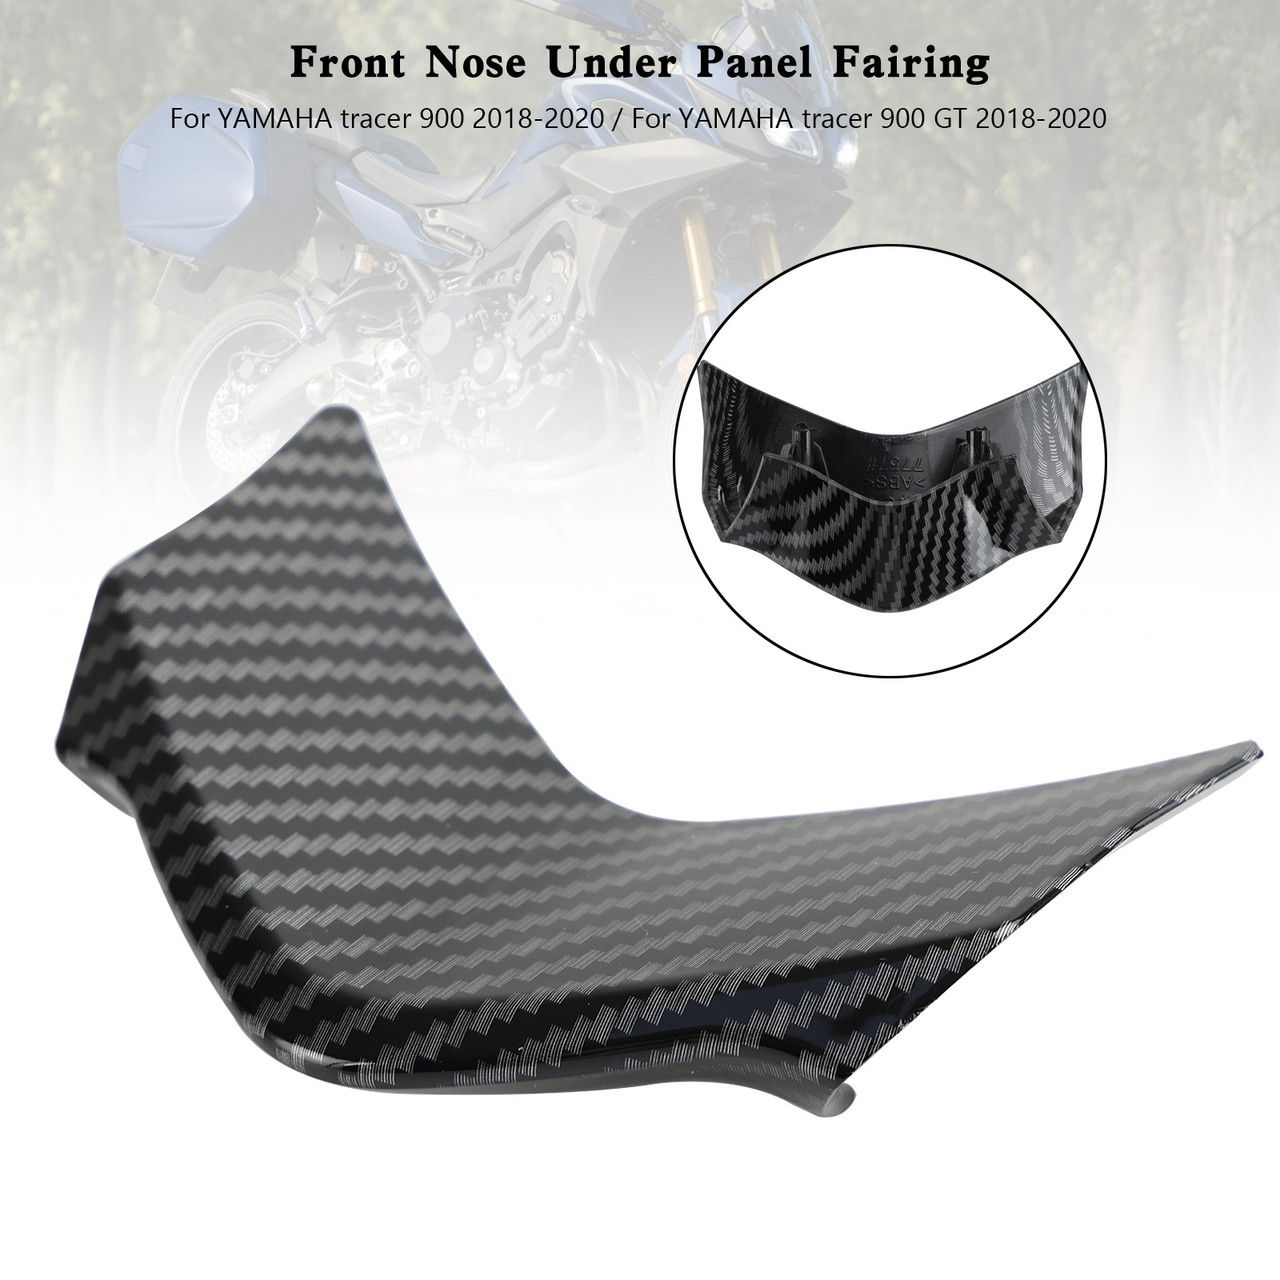 Front Nose Under Panel Fairing For Yamaha Tracer 900 / GT 2018-2020 Carbon